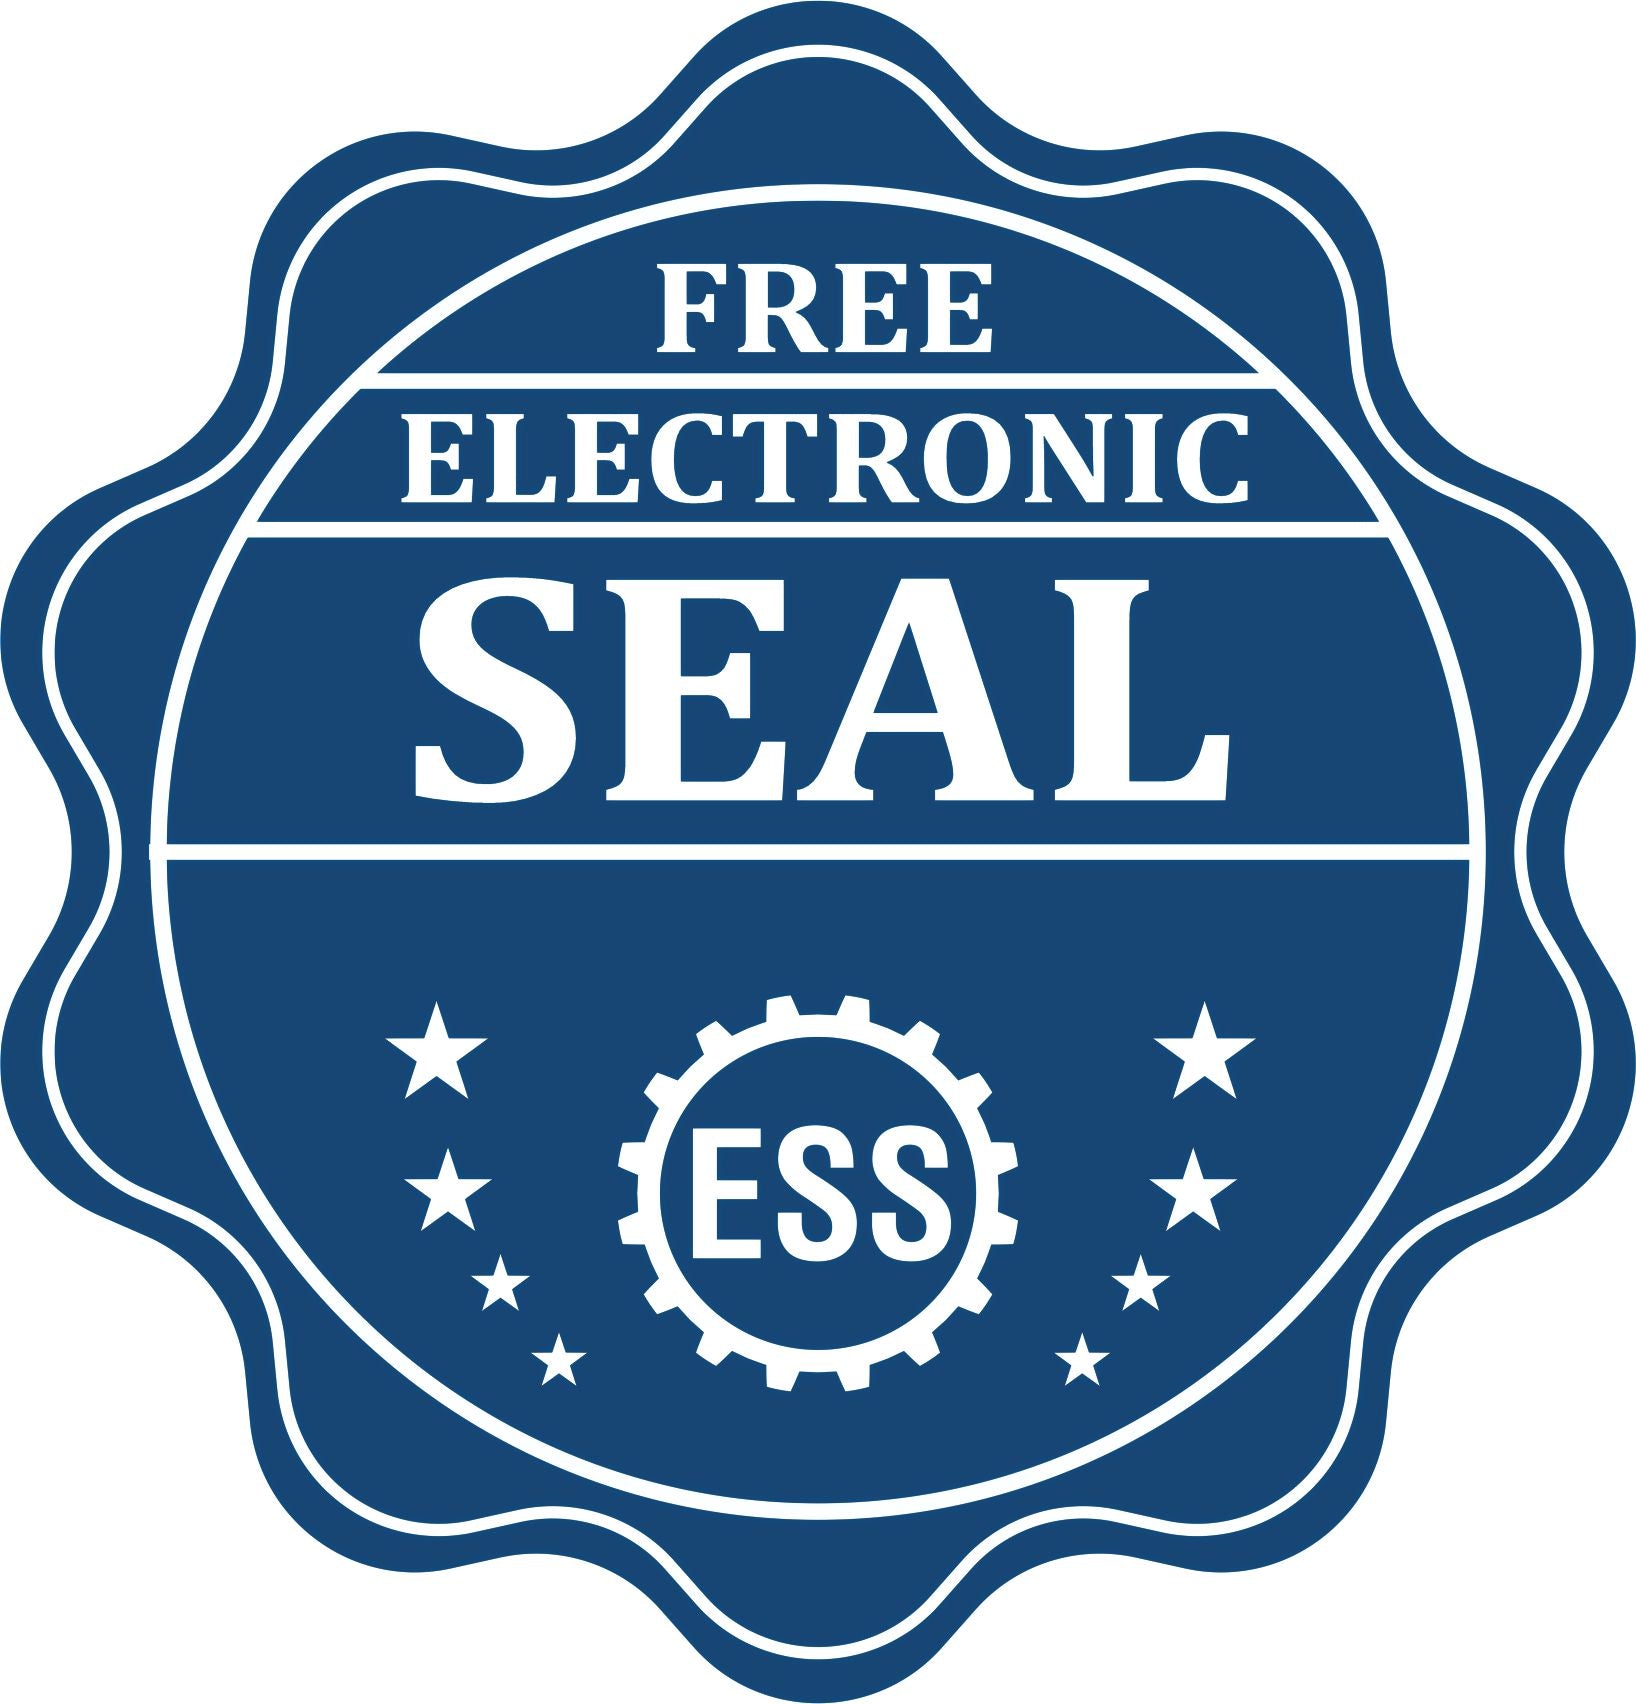 A badge showing a free electronic seal for the PSI North Dakota Notary Stamp with stars and the ESS gear on the emblem.